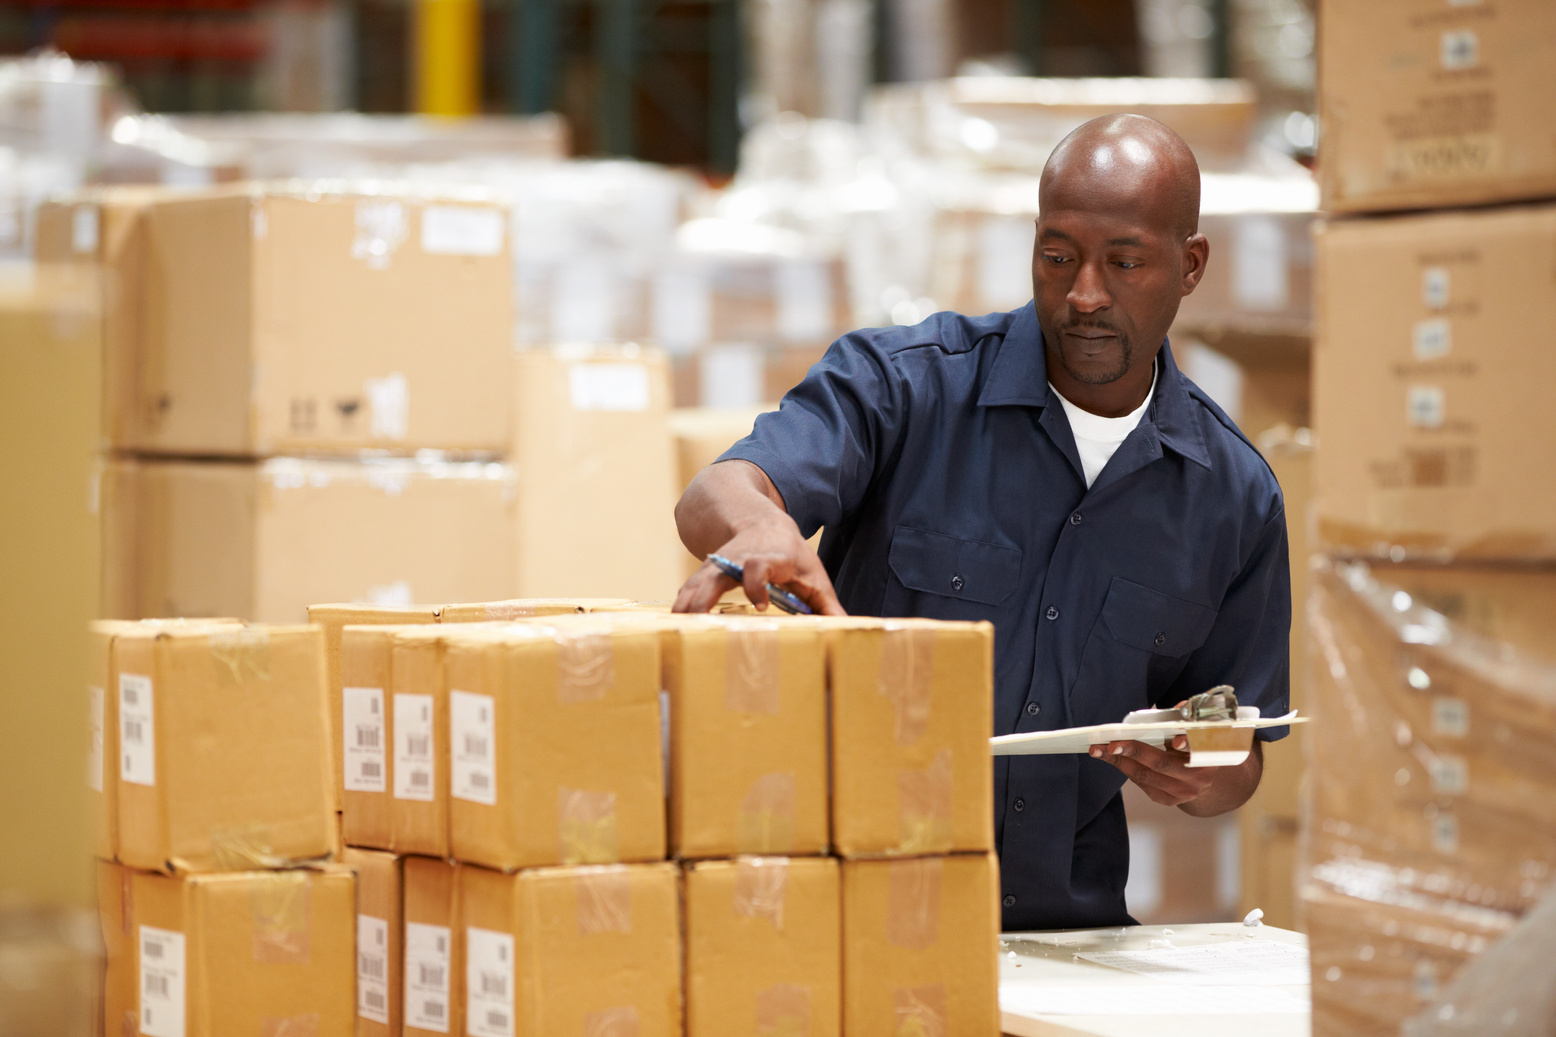 Worker in Warehouse Preparing Goods for Dispatch